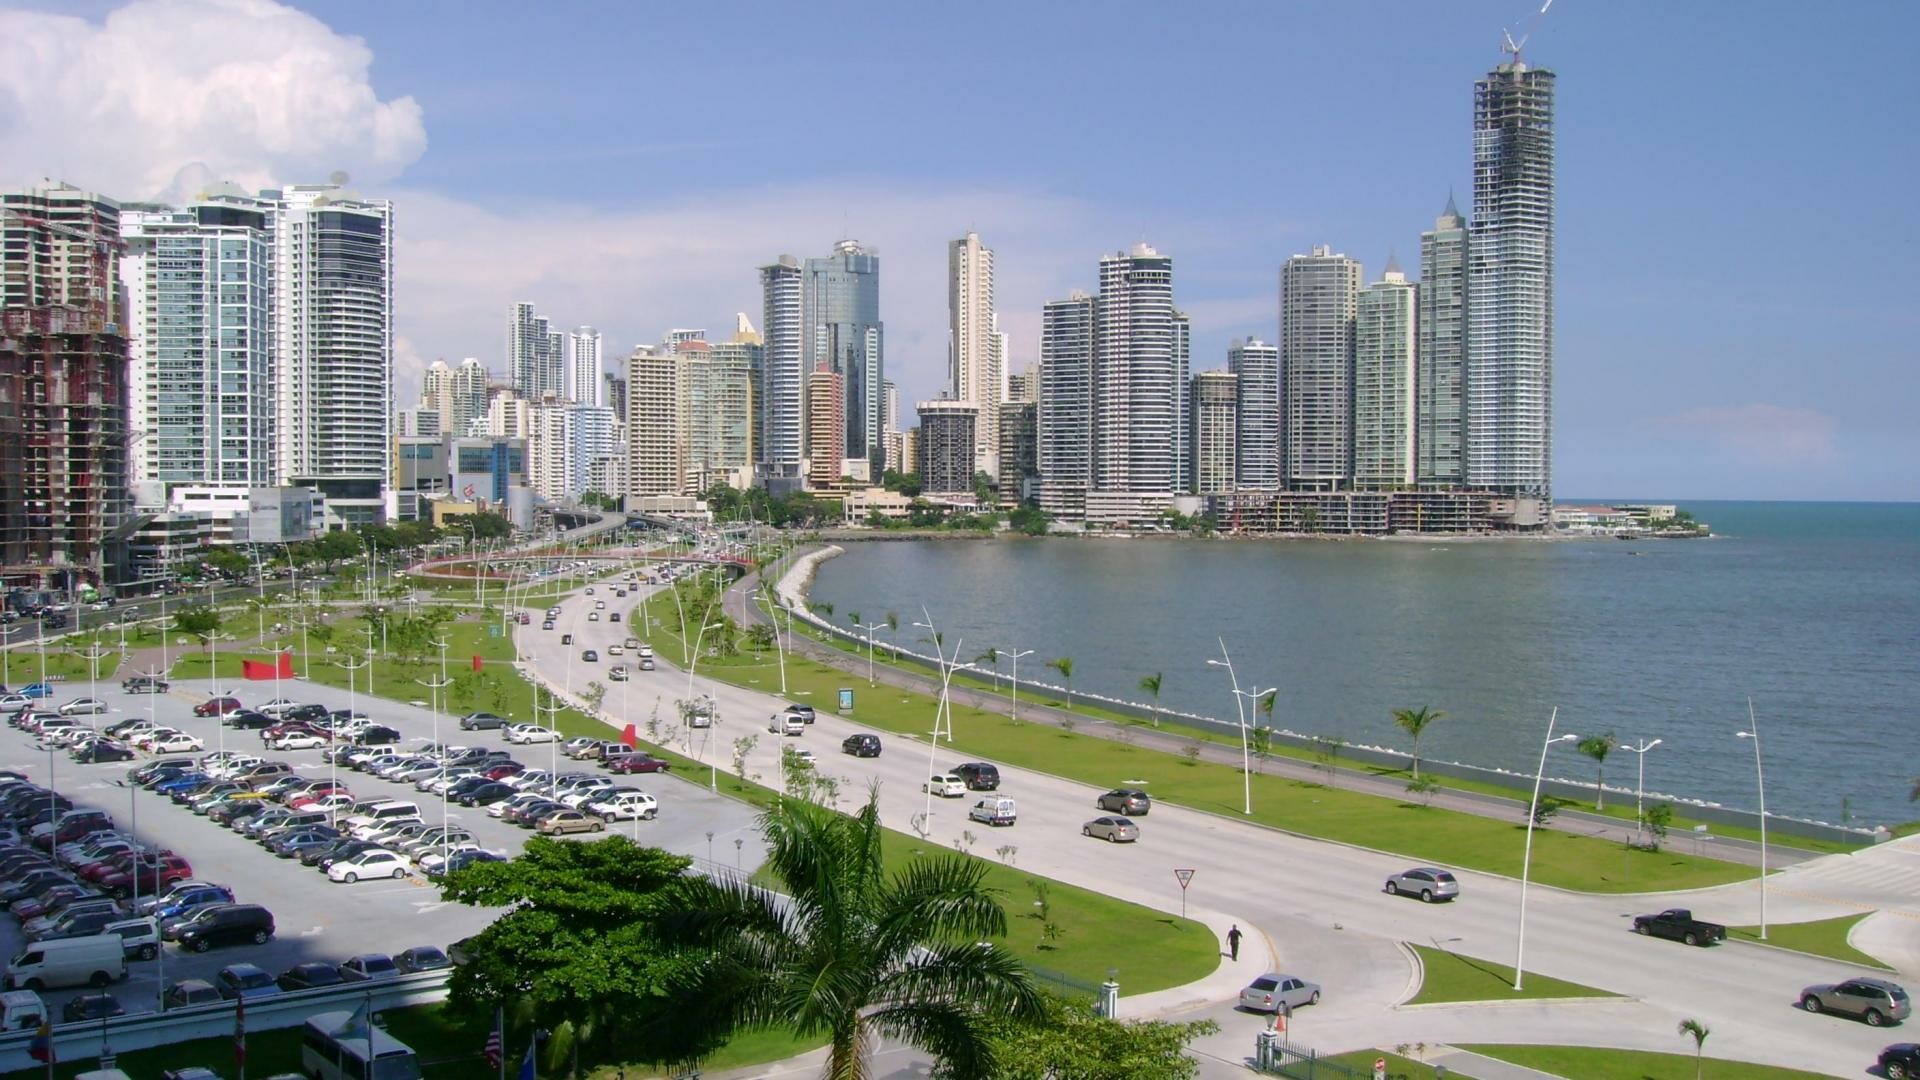 Panama: Panama's cosmopolitan capital, The only true First World city in Central America. 1920x1080 Full HD Wallpaper.